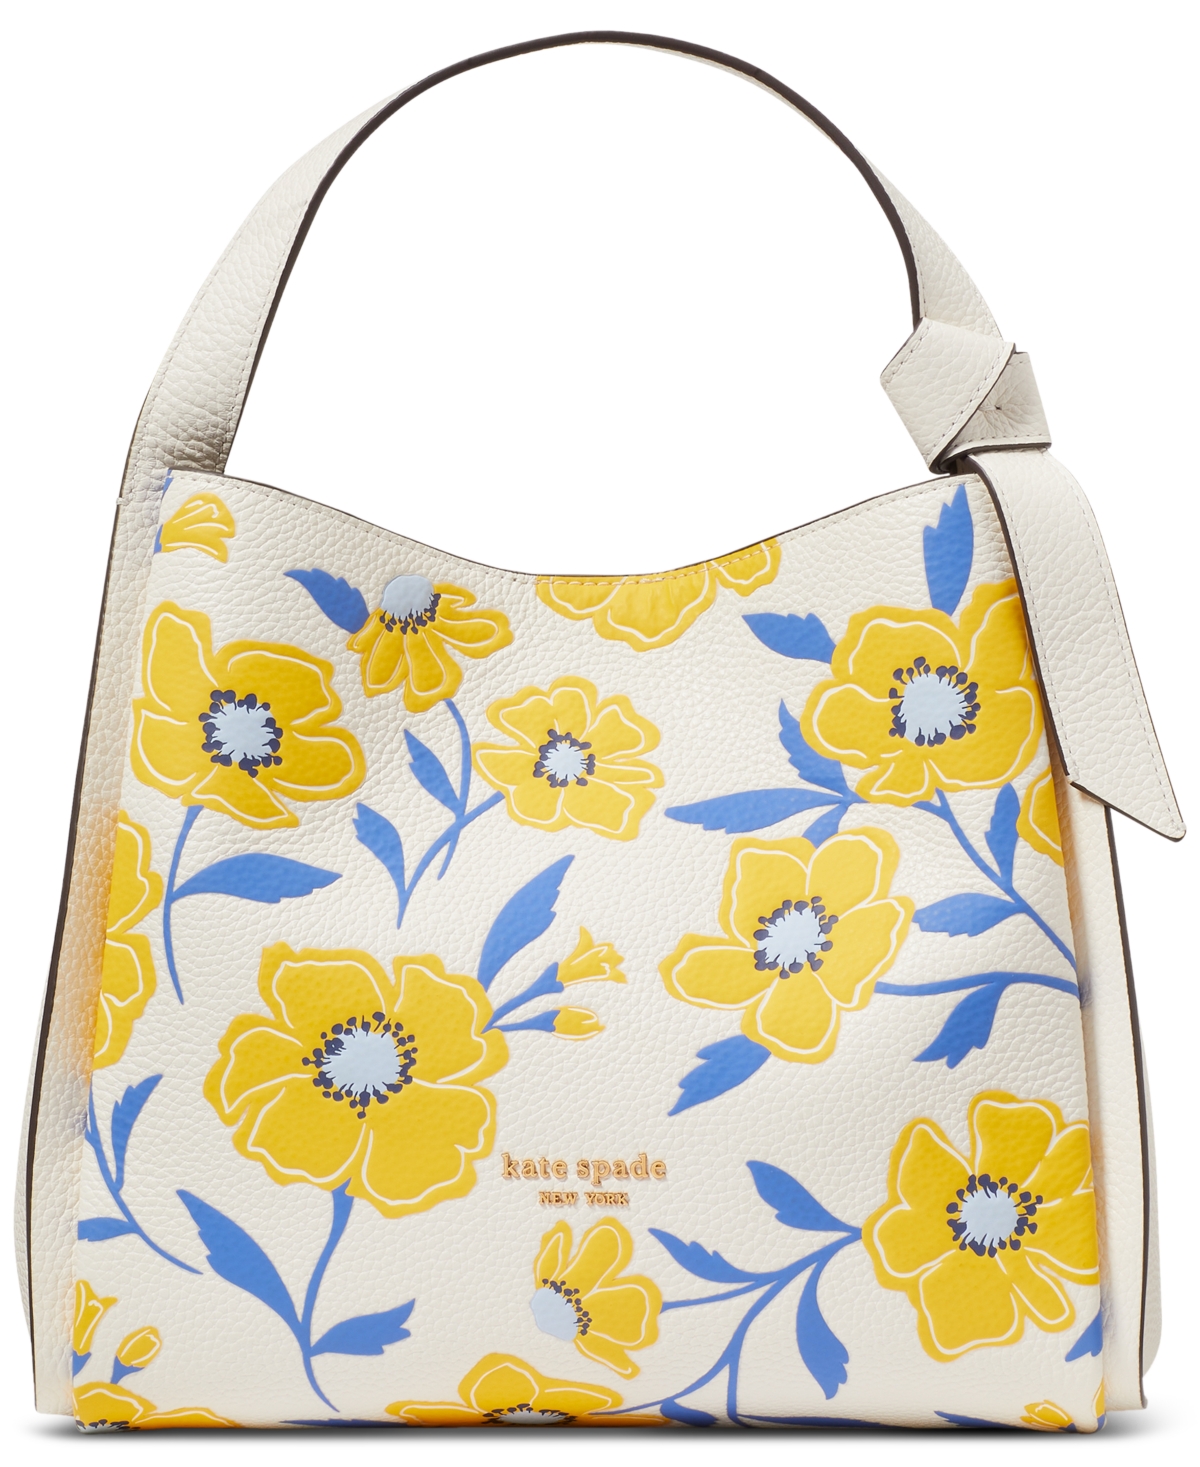 Kate Spade Knott Sunshine Floral Embossed Pebbled Leather Small Crossbody Tote In Cream Multi